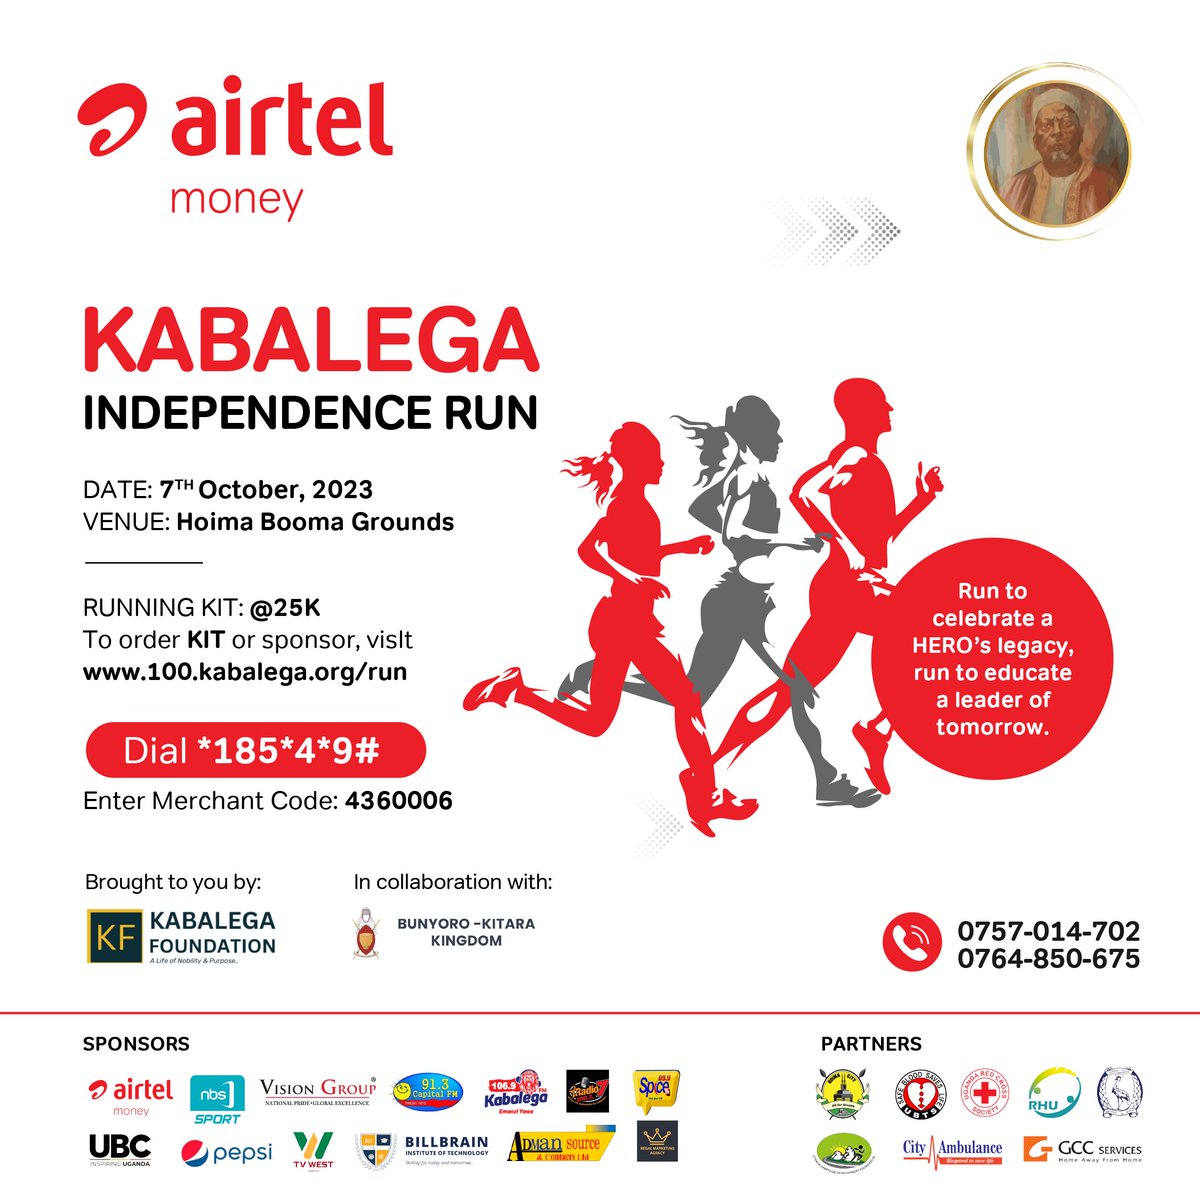 Gear up to celebrate the legacy of a hero at the Kabalega Independence run in Hoima.

Running kits are available at just 25K. To pay wiyh Airtel Money, simply dial *185*4*9# and enter merchant code 4360006.

#kabalegaindependencerun 
#100YearsofKabalega

🌍100.kabalega.org/run